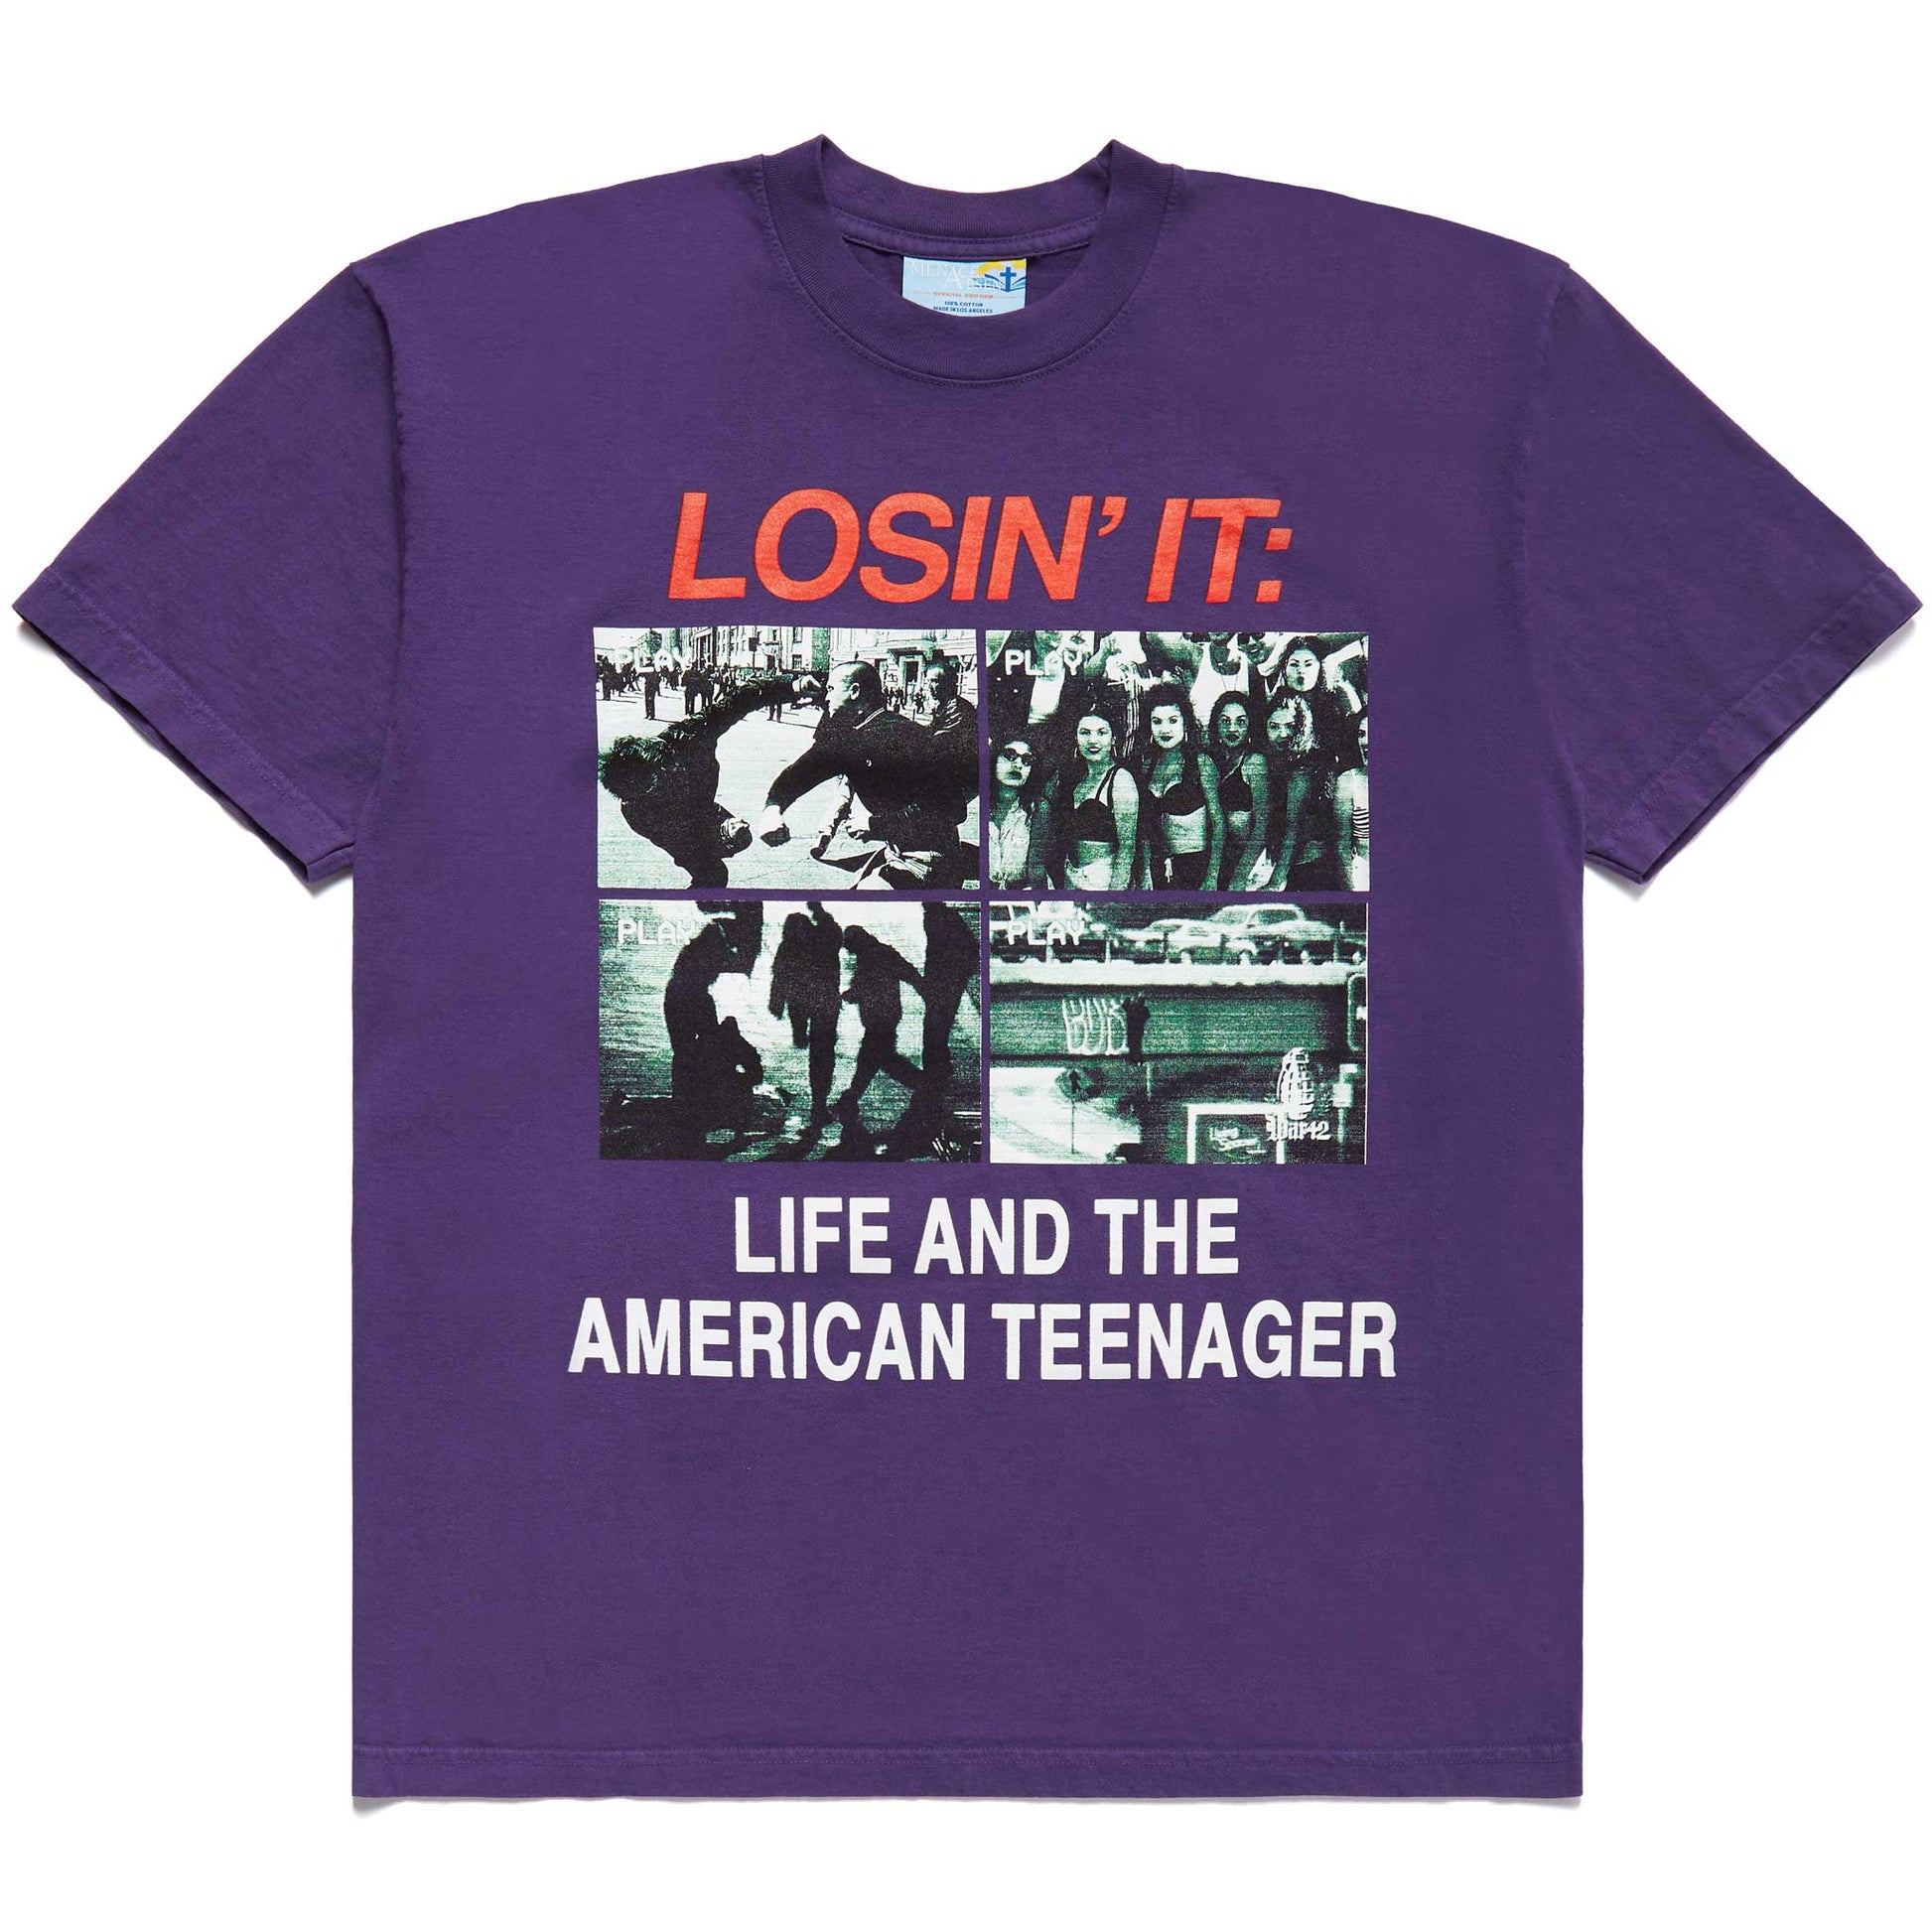 AMERICAN TEENAGER T-SHIRT by MENACE